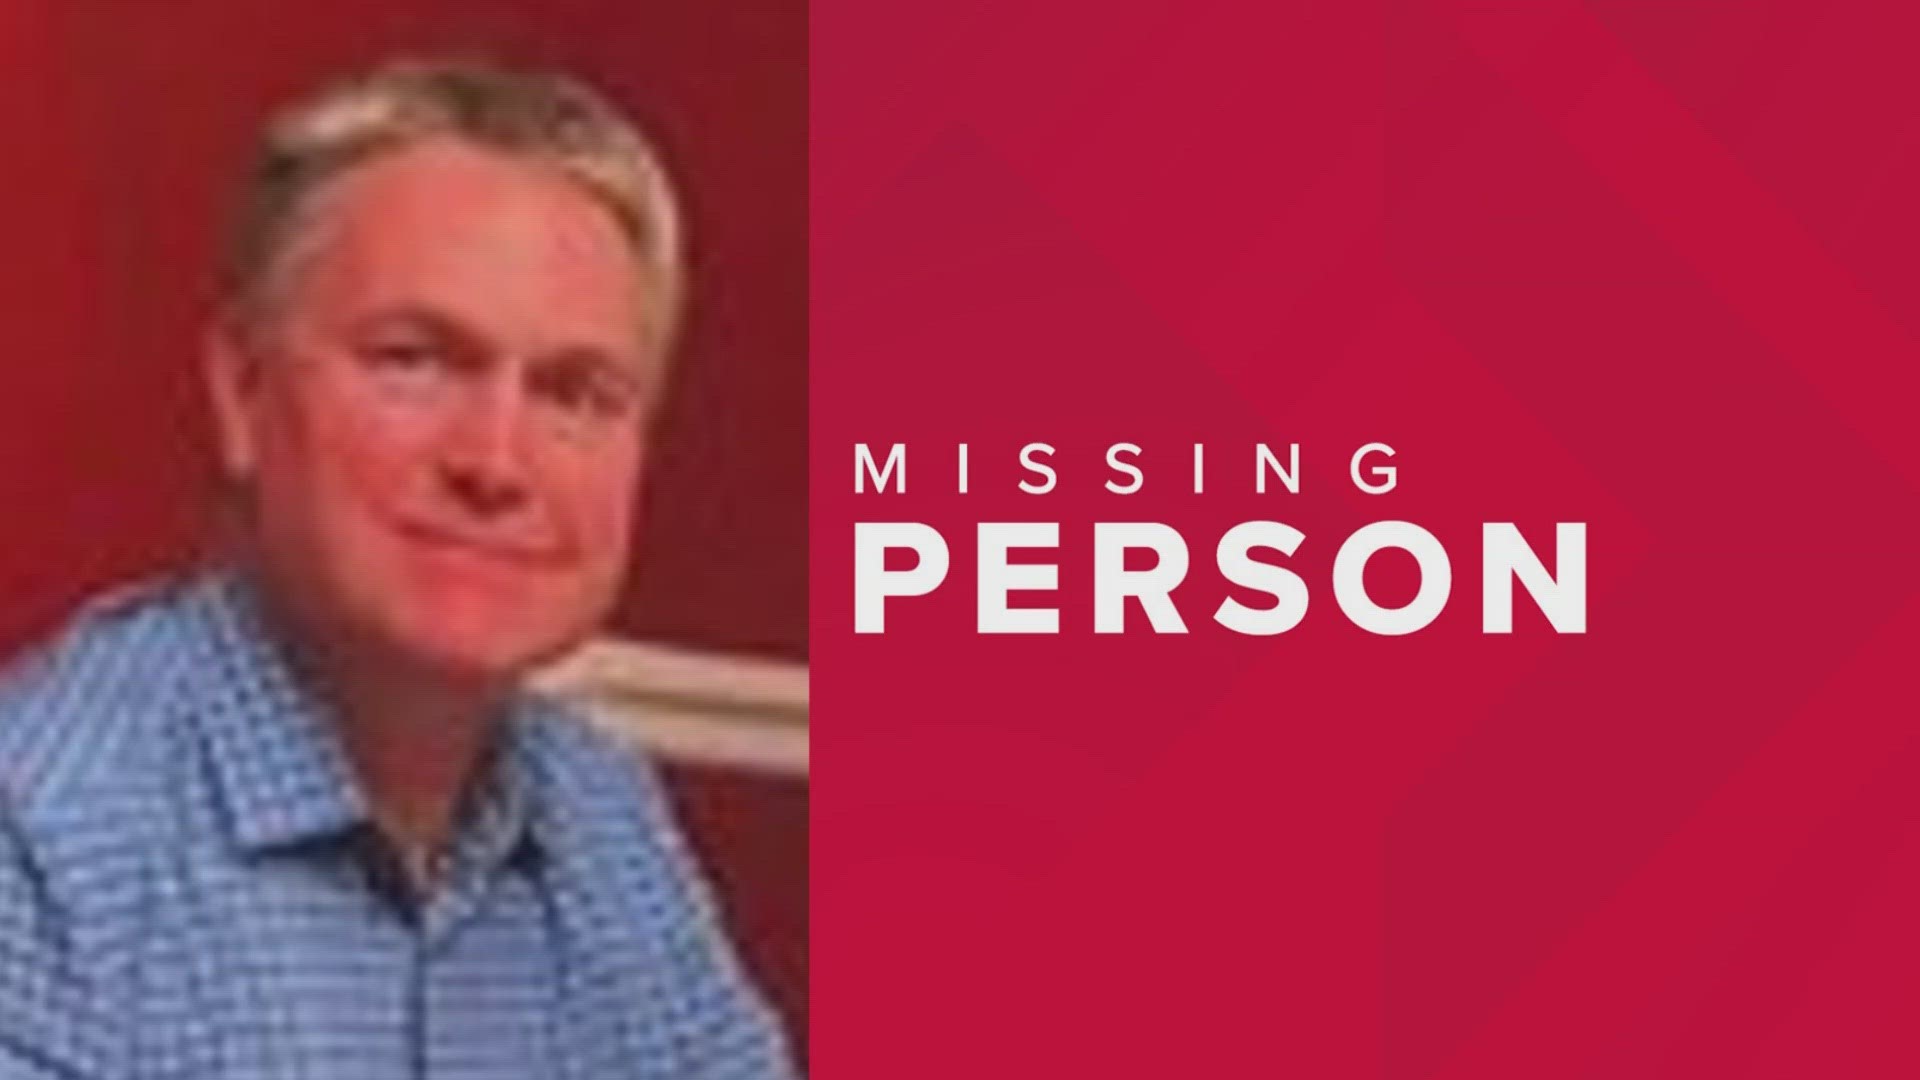 Mississippi authorities have released a silver alert for missing man with a medical condition that family members said could impair his judgement.